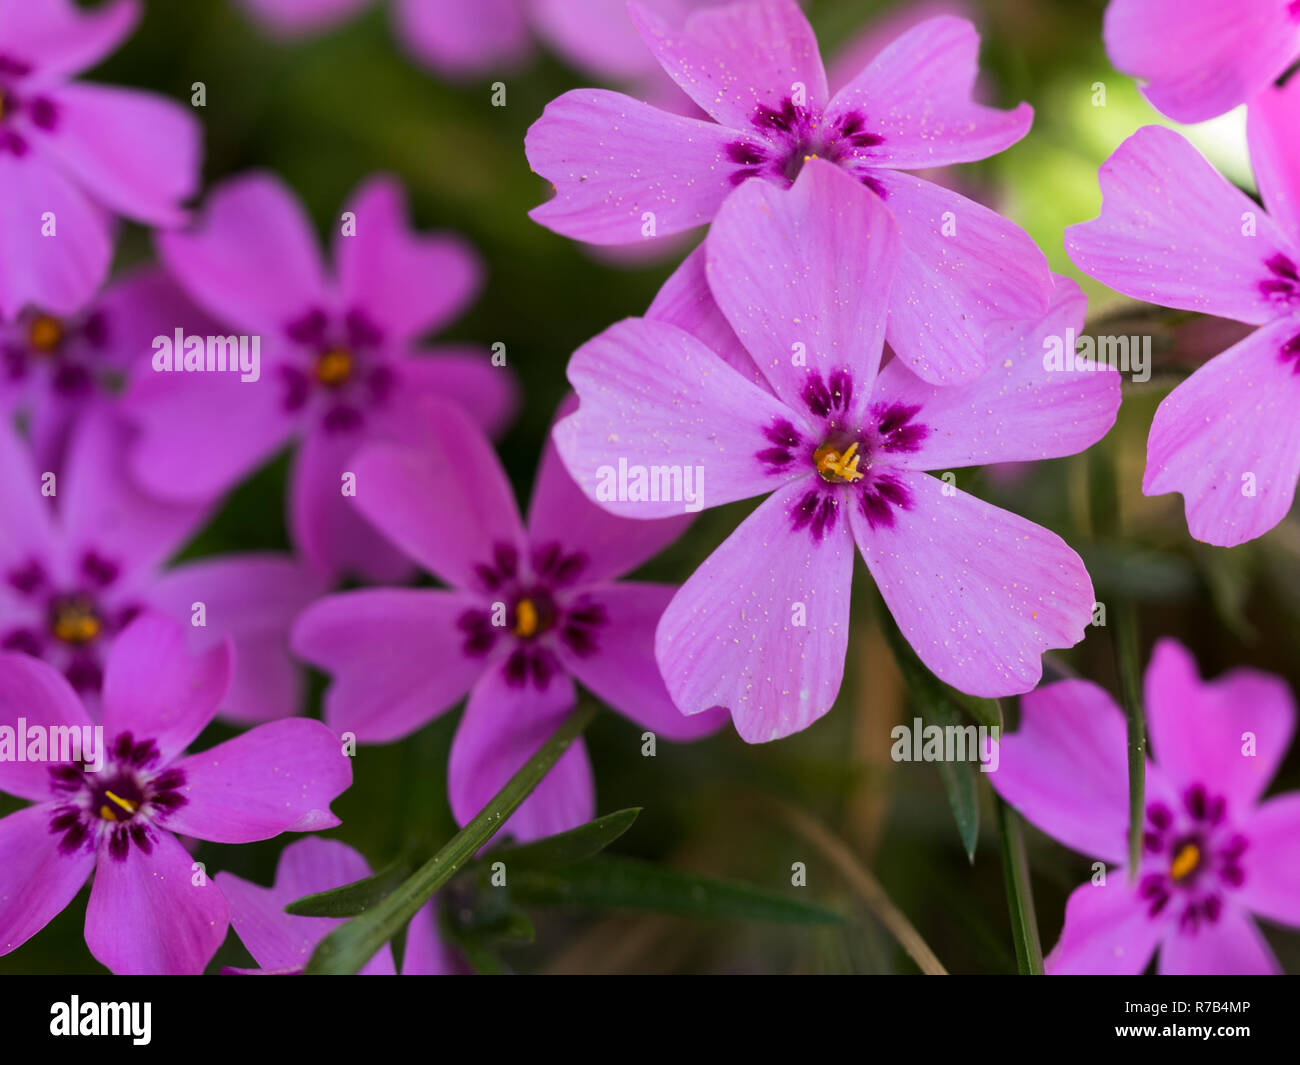 Close-up of beautiful pink phlox blossoms in front of a green background Stock Photo